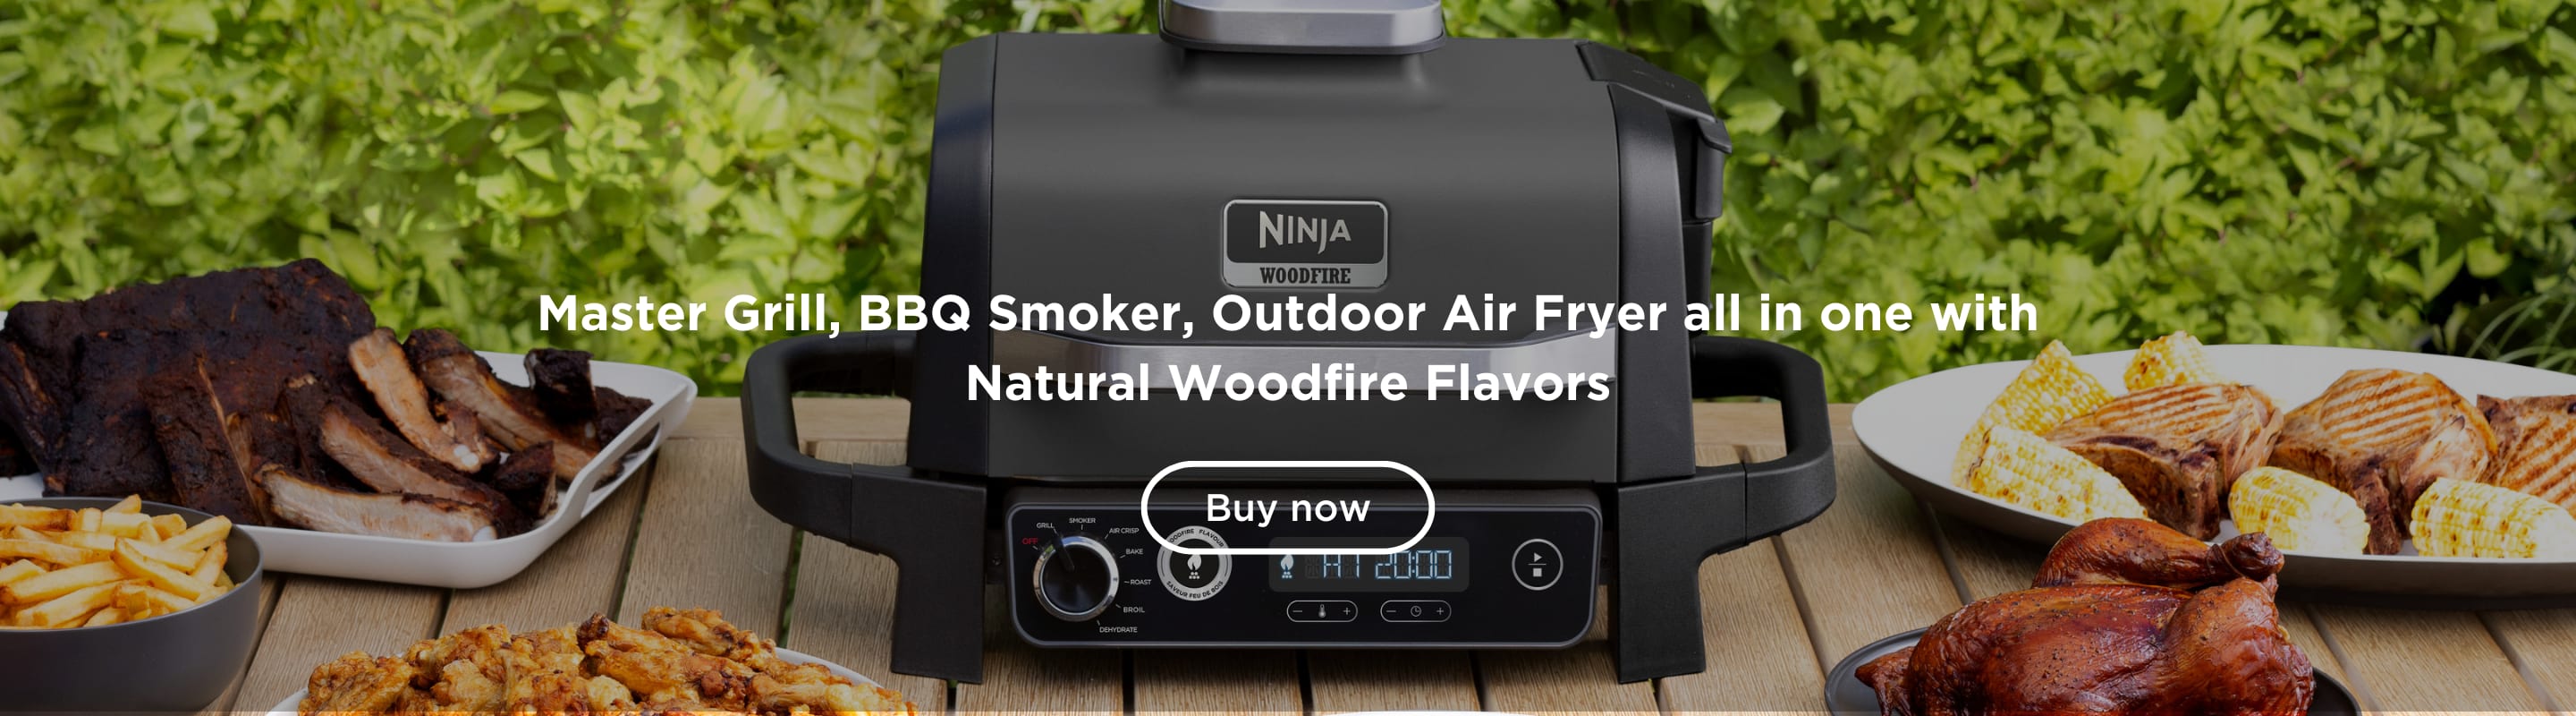 https://res.cloudinary.com/sharkninja-na/image/upload/v1679162313/NinjaCAD/ICM%202.0%20%282023%29/Category%20Pages/Outdoor%20Grill/Full%20width%20Image/Ninja_OG_CategoryBanners_2880X600_px.png